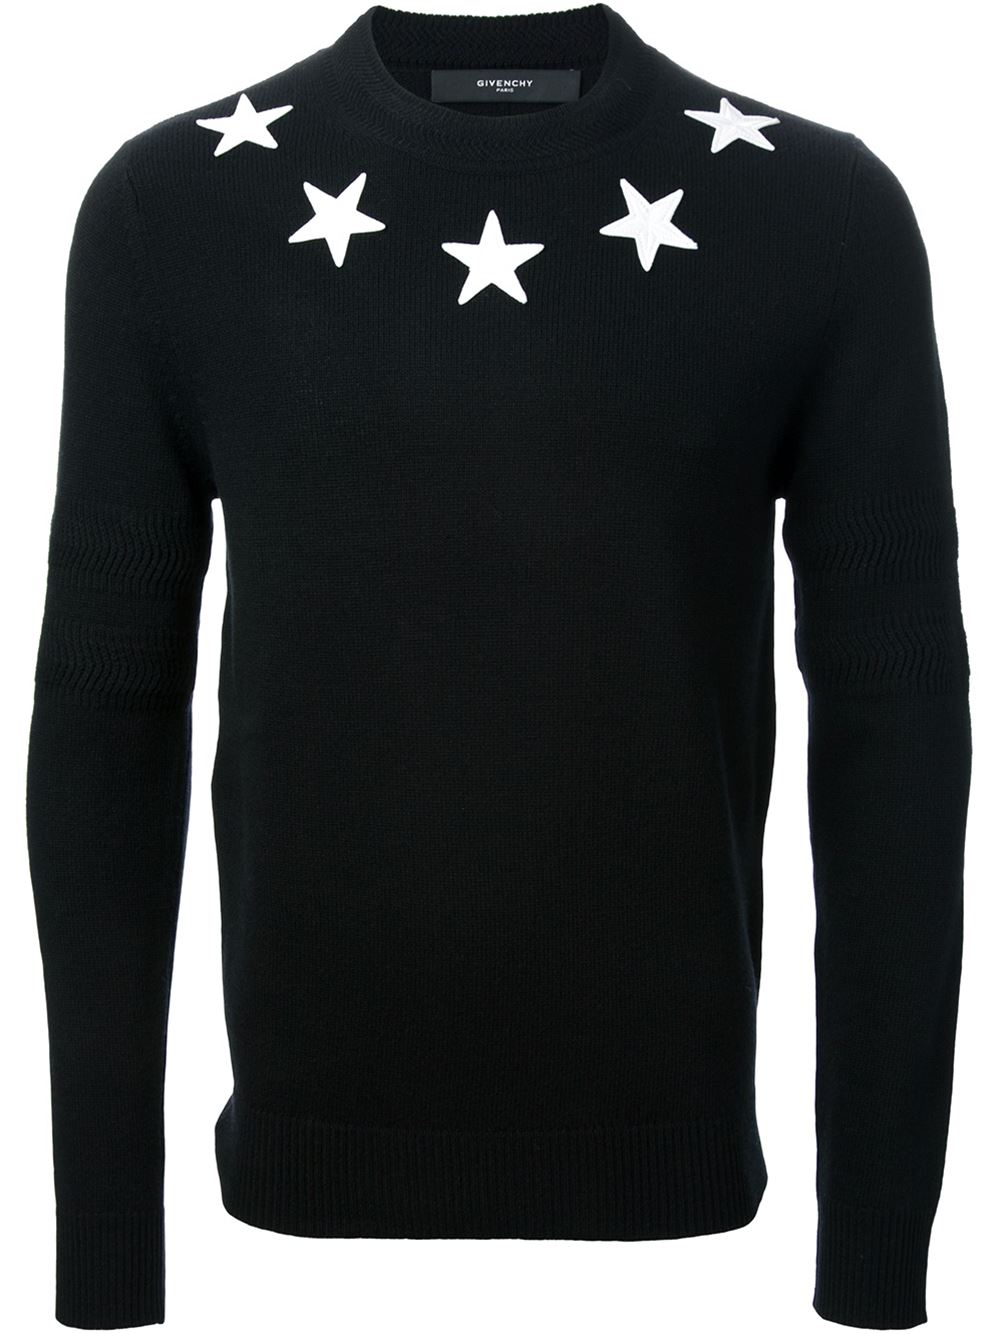 Givenchy Star Sweater in Black for Men - Lyst